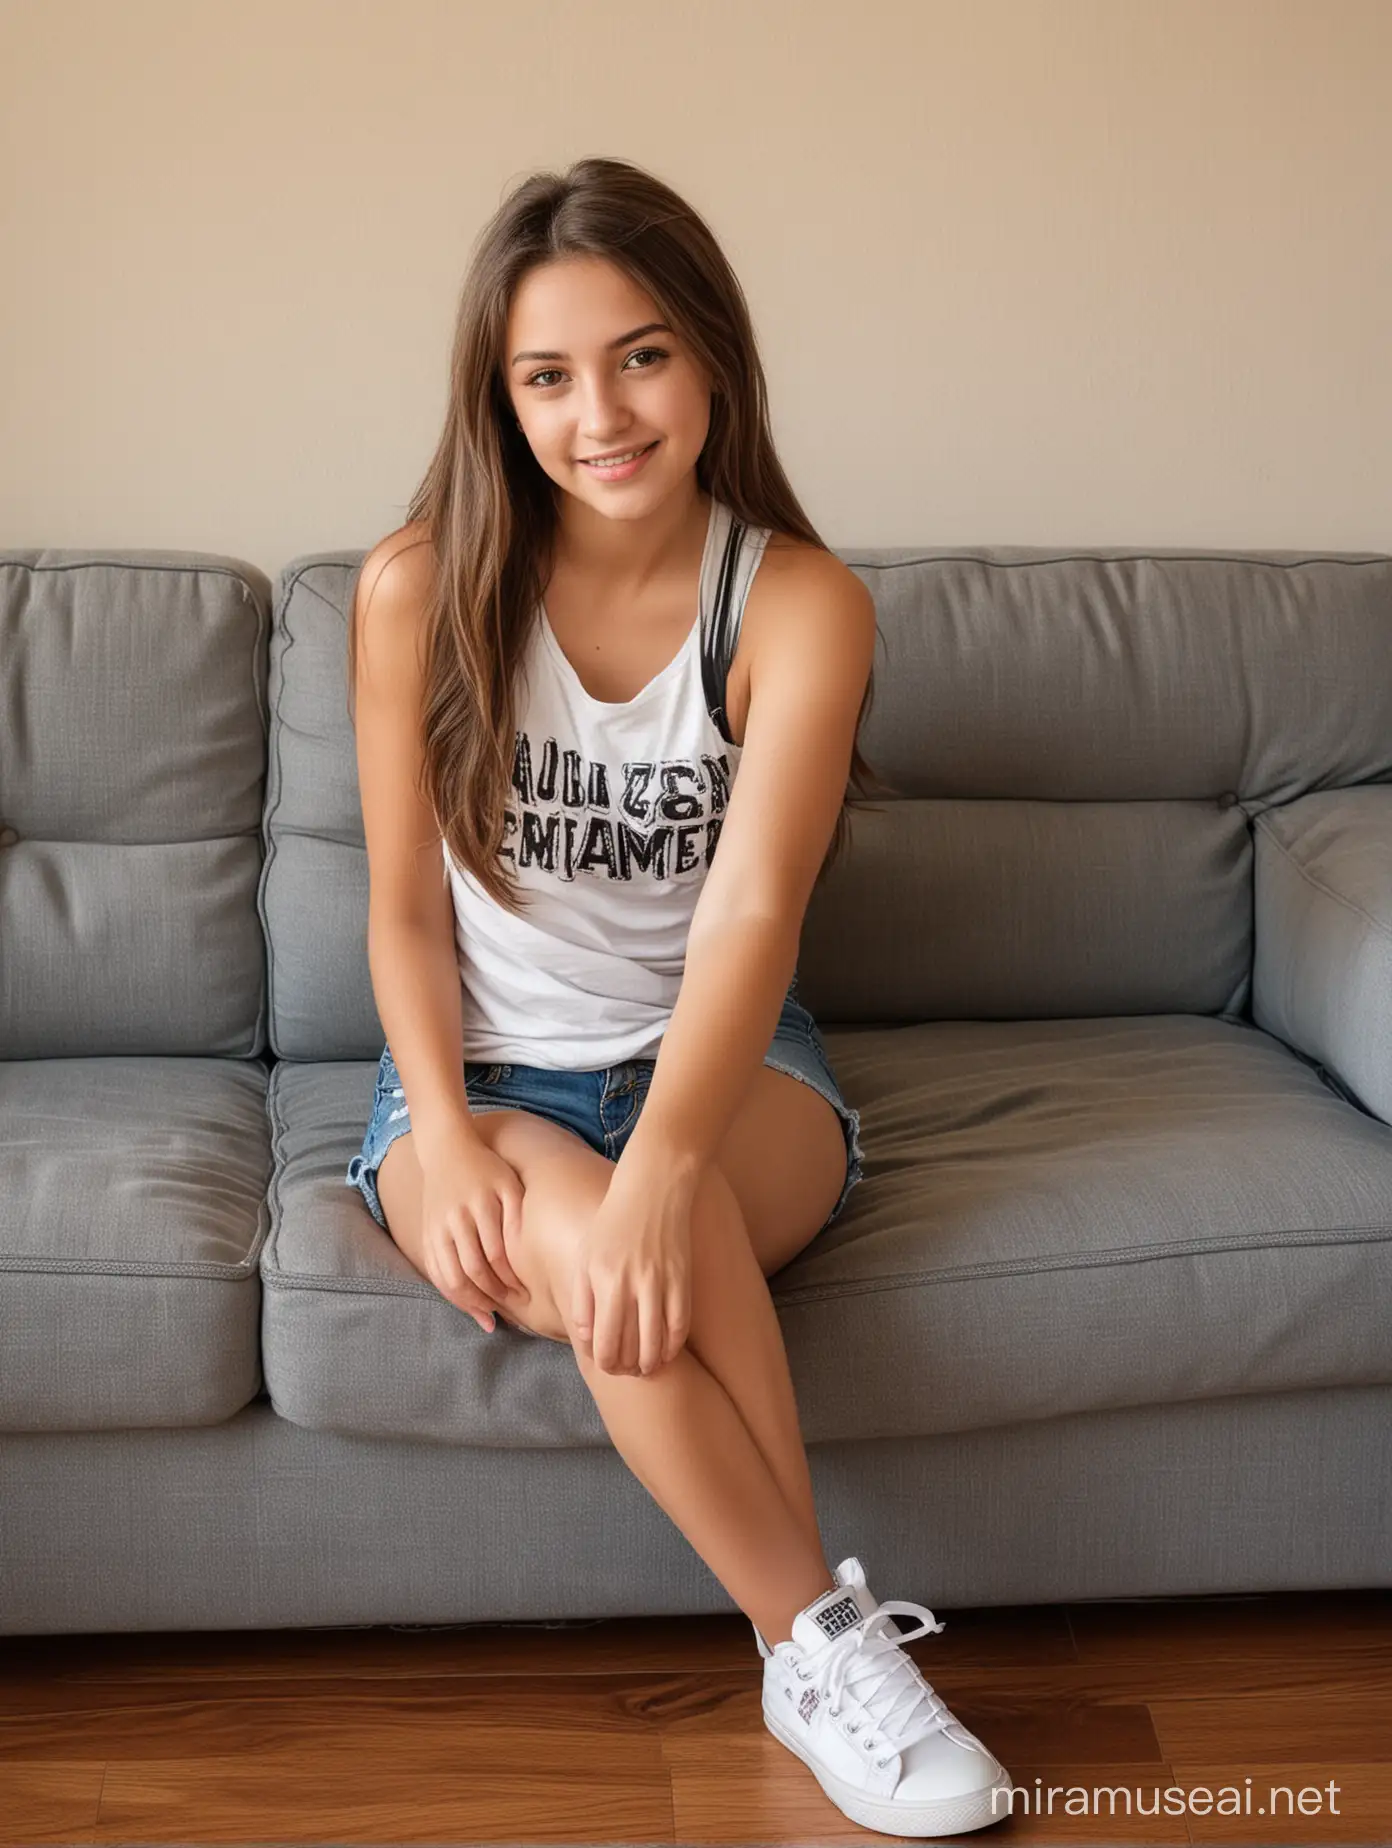 14 years old sweet and cute long straight wavy brunette hair brown eyes wearing a tanktop and jean shorts at home sitting on the couch l extremely cute beautiful sunny day full body full view sneakers 